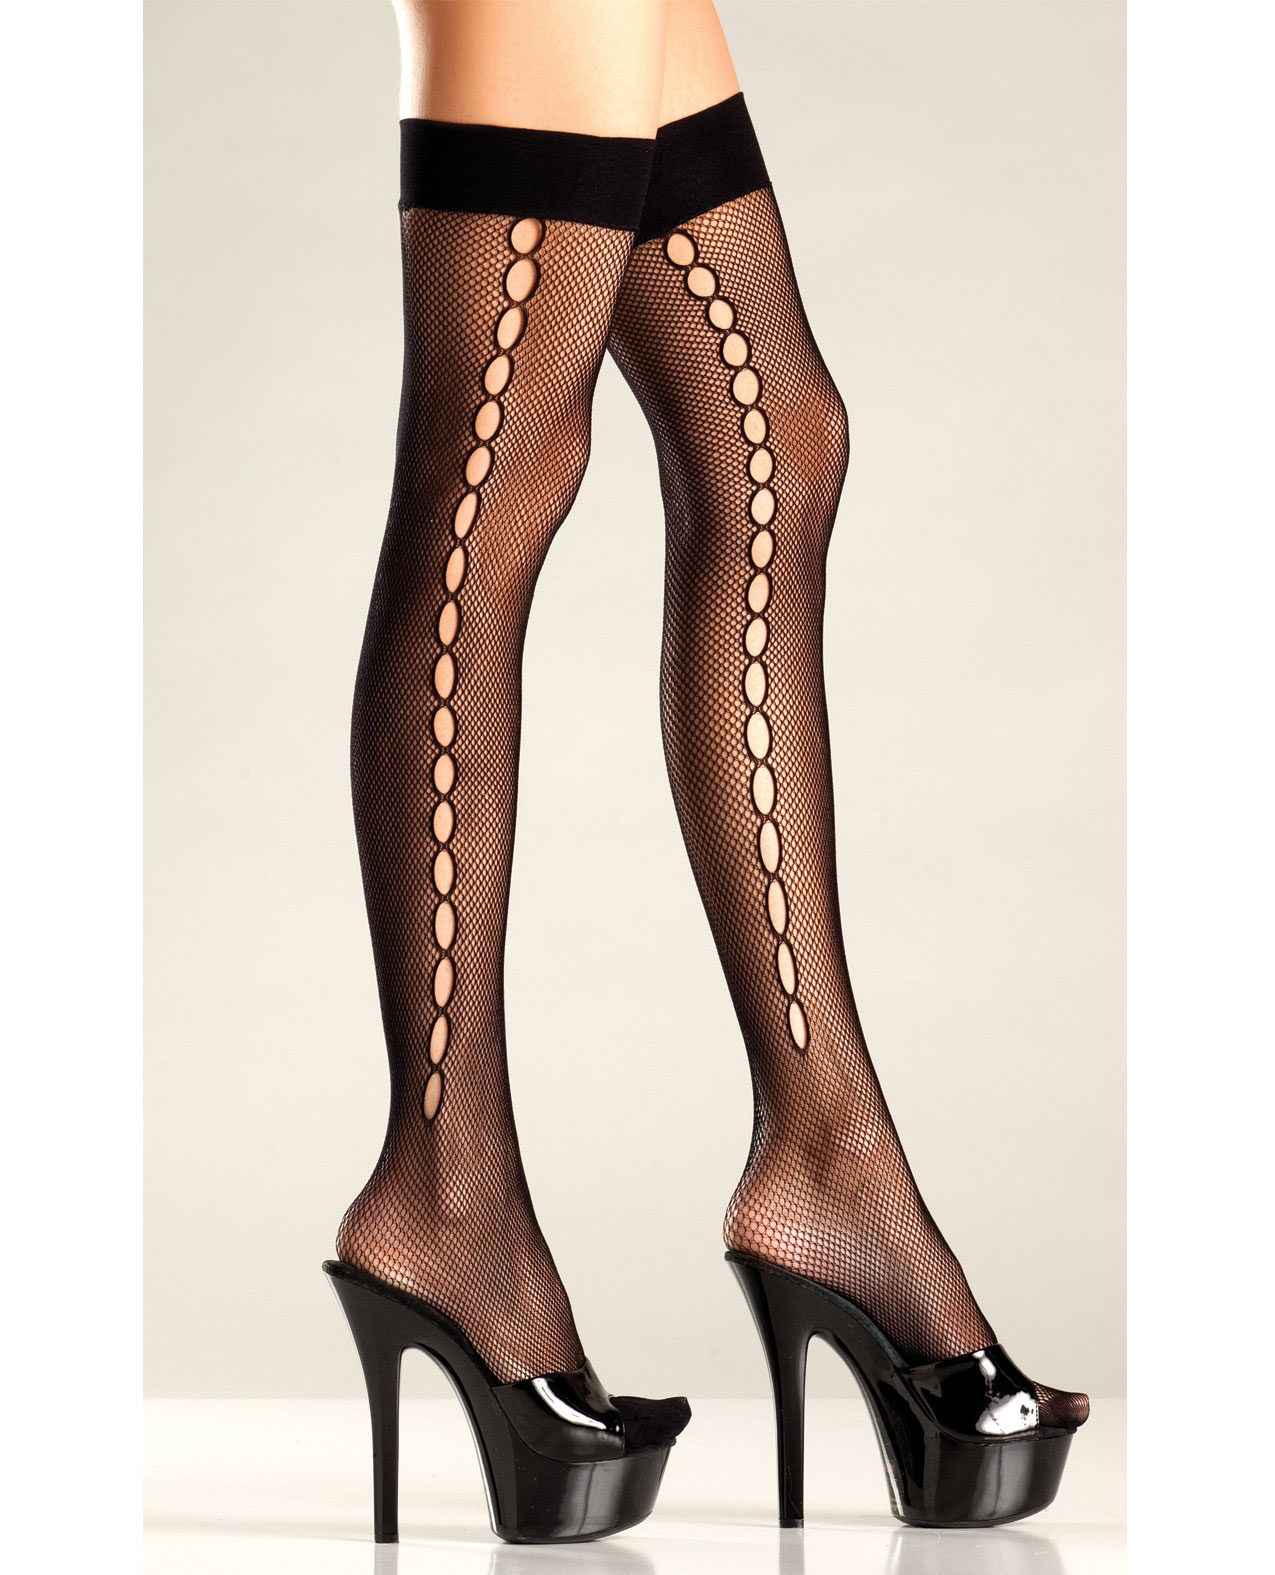 Be wicked Women's Crochet Net Thigh High - One Size